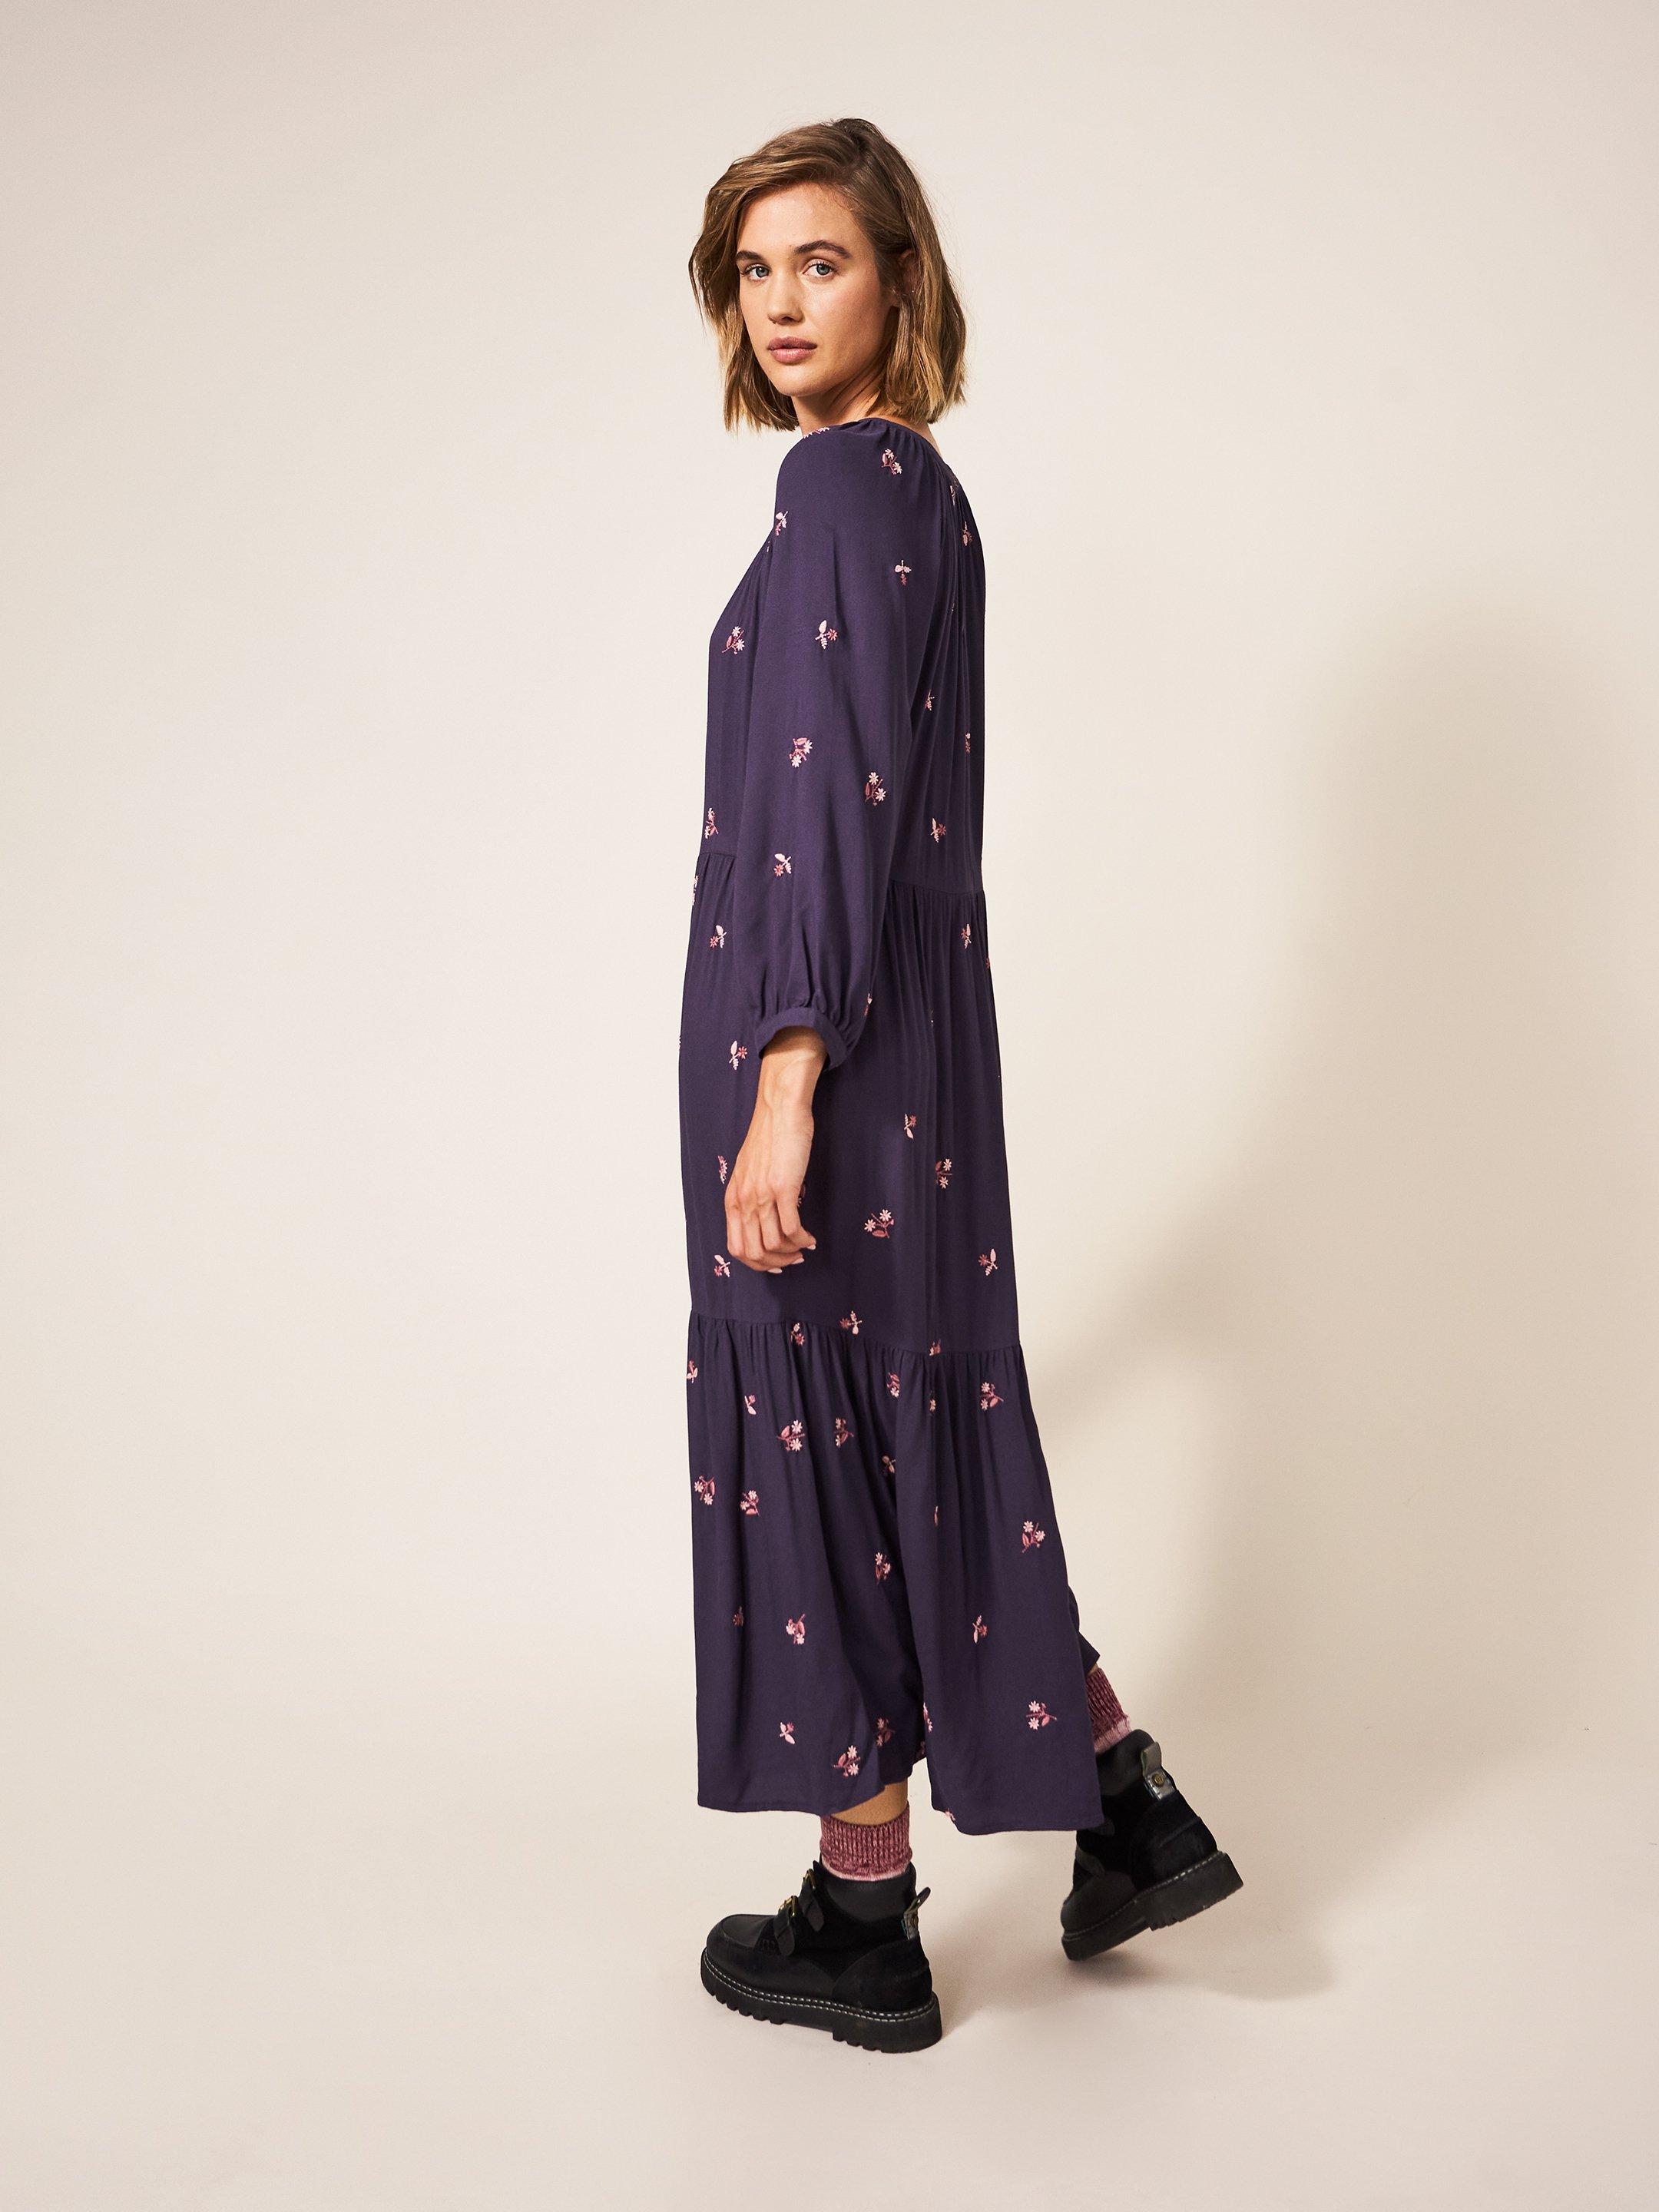 Clara Embroidered Dress in PURPLE MLT - MODEL BACK